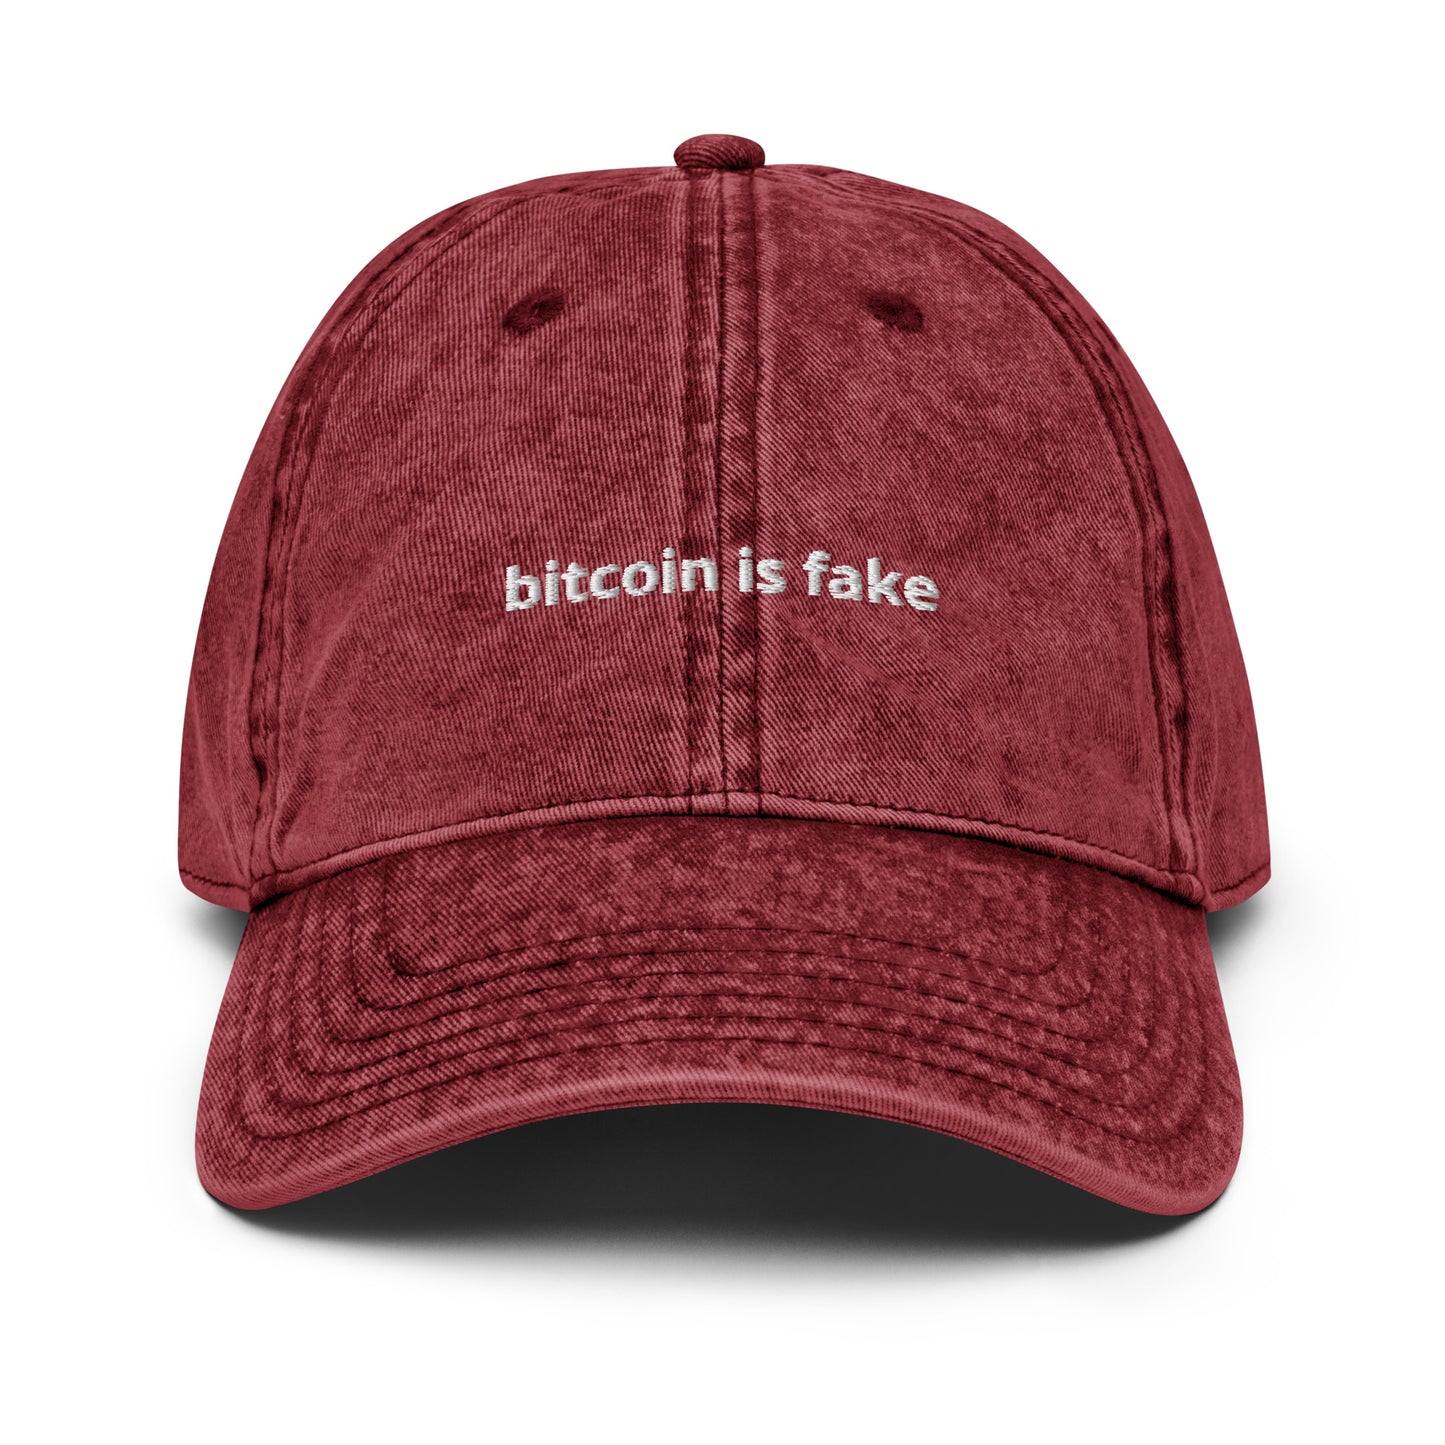 'bitcoin is fake' - Vintage Cotton Greeting Hat